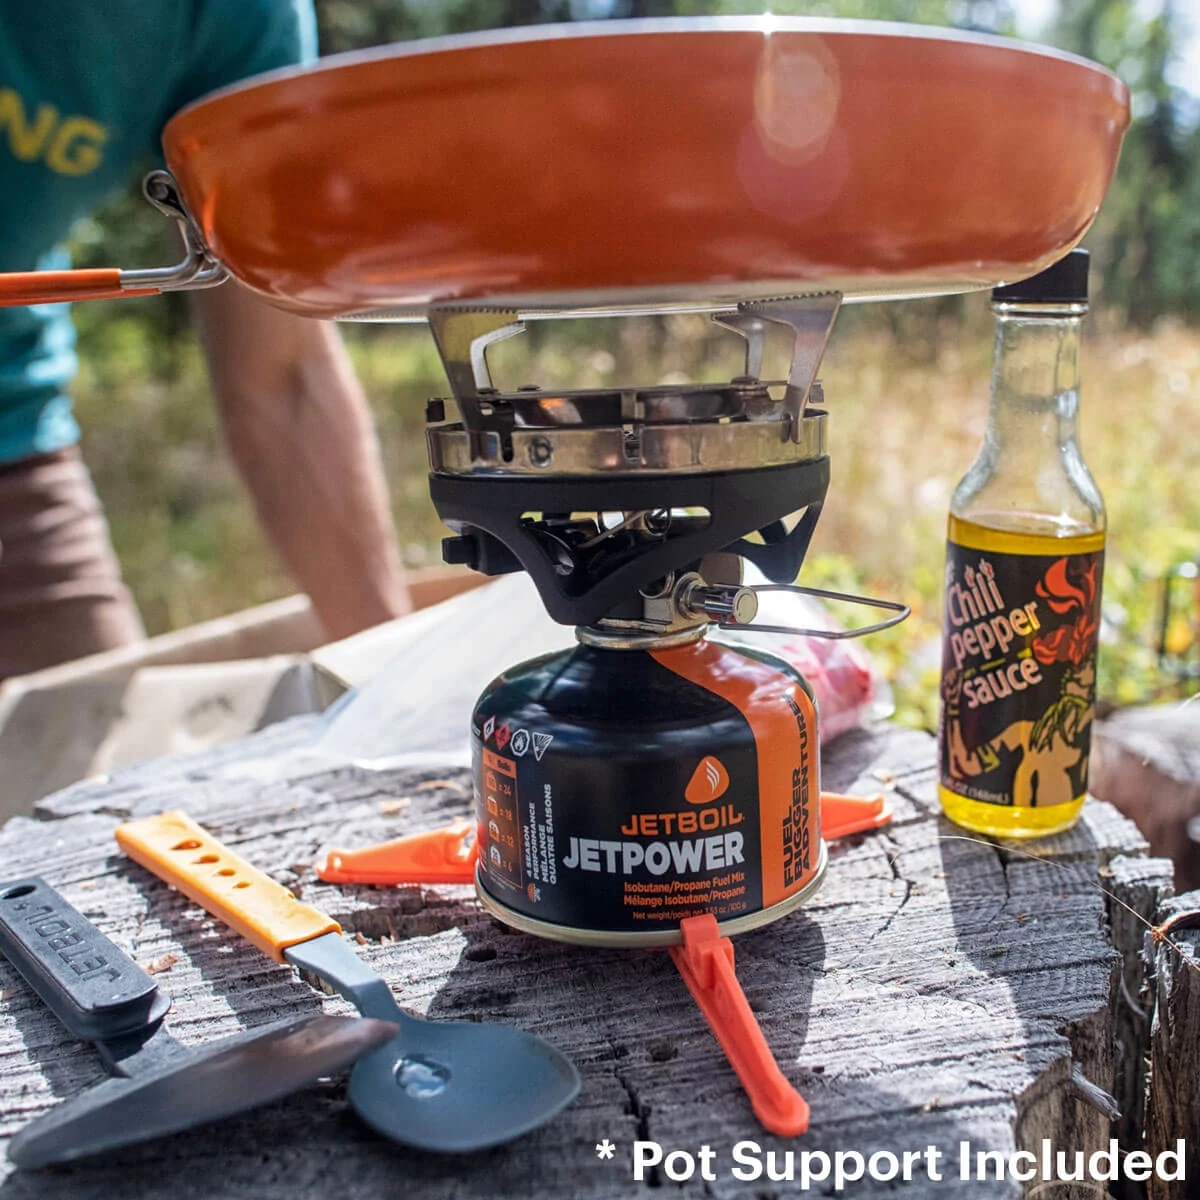 SUMO Cooking System - Jetboil